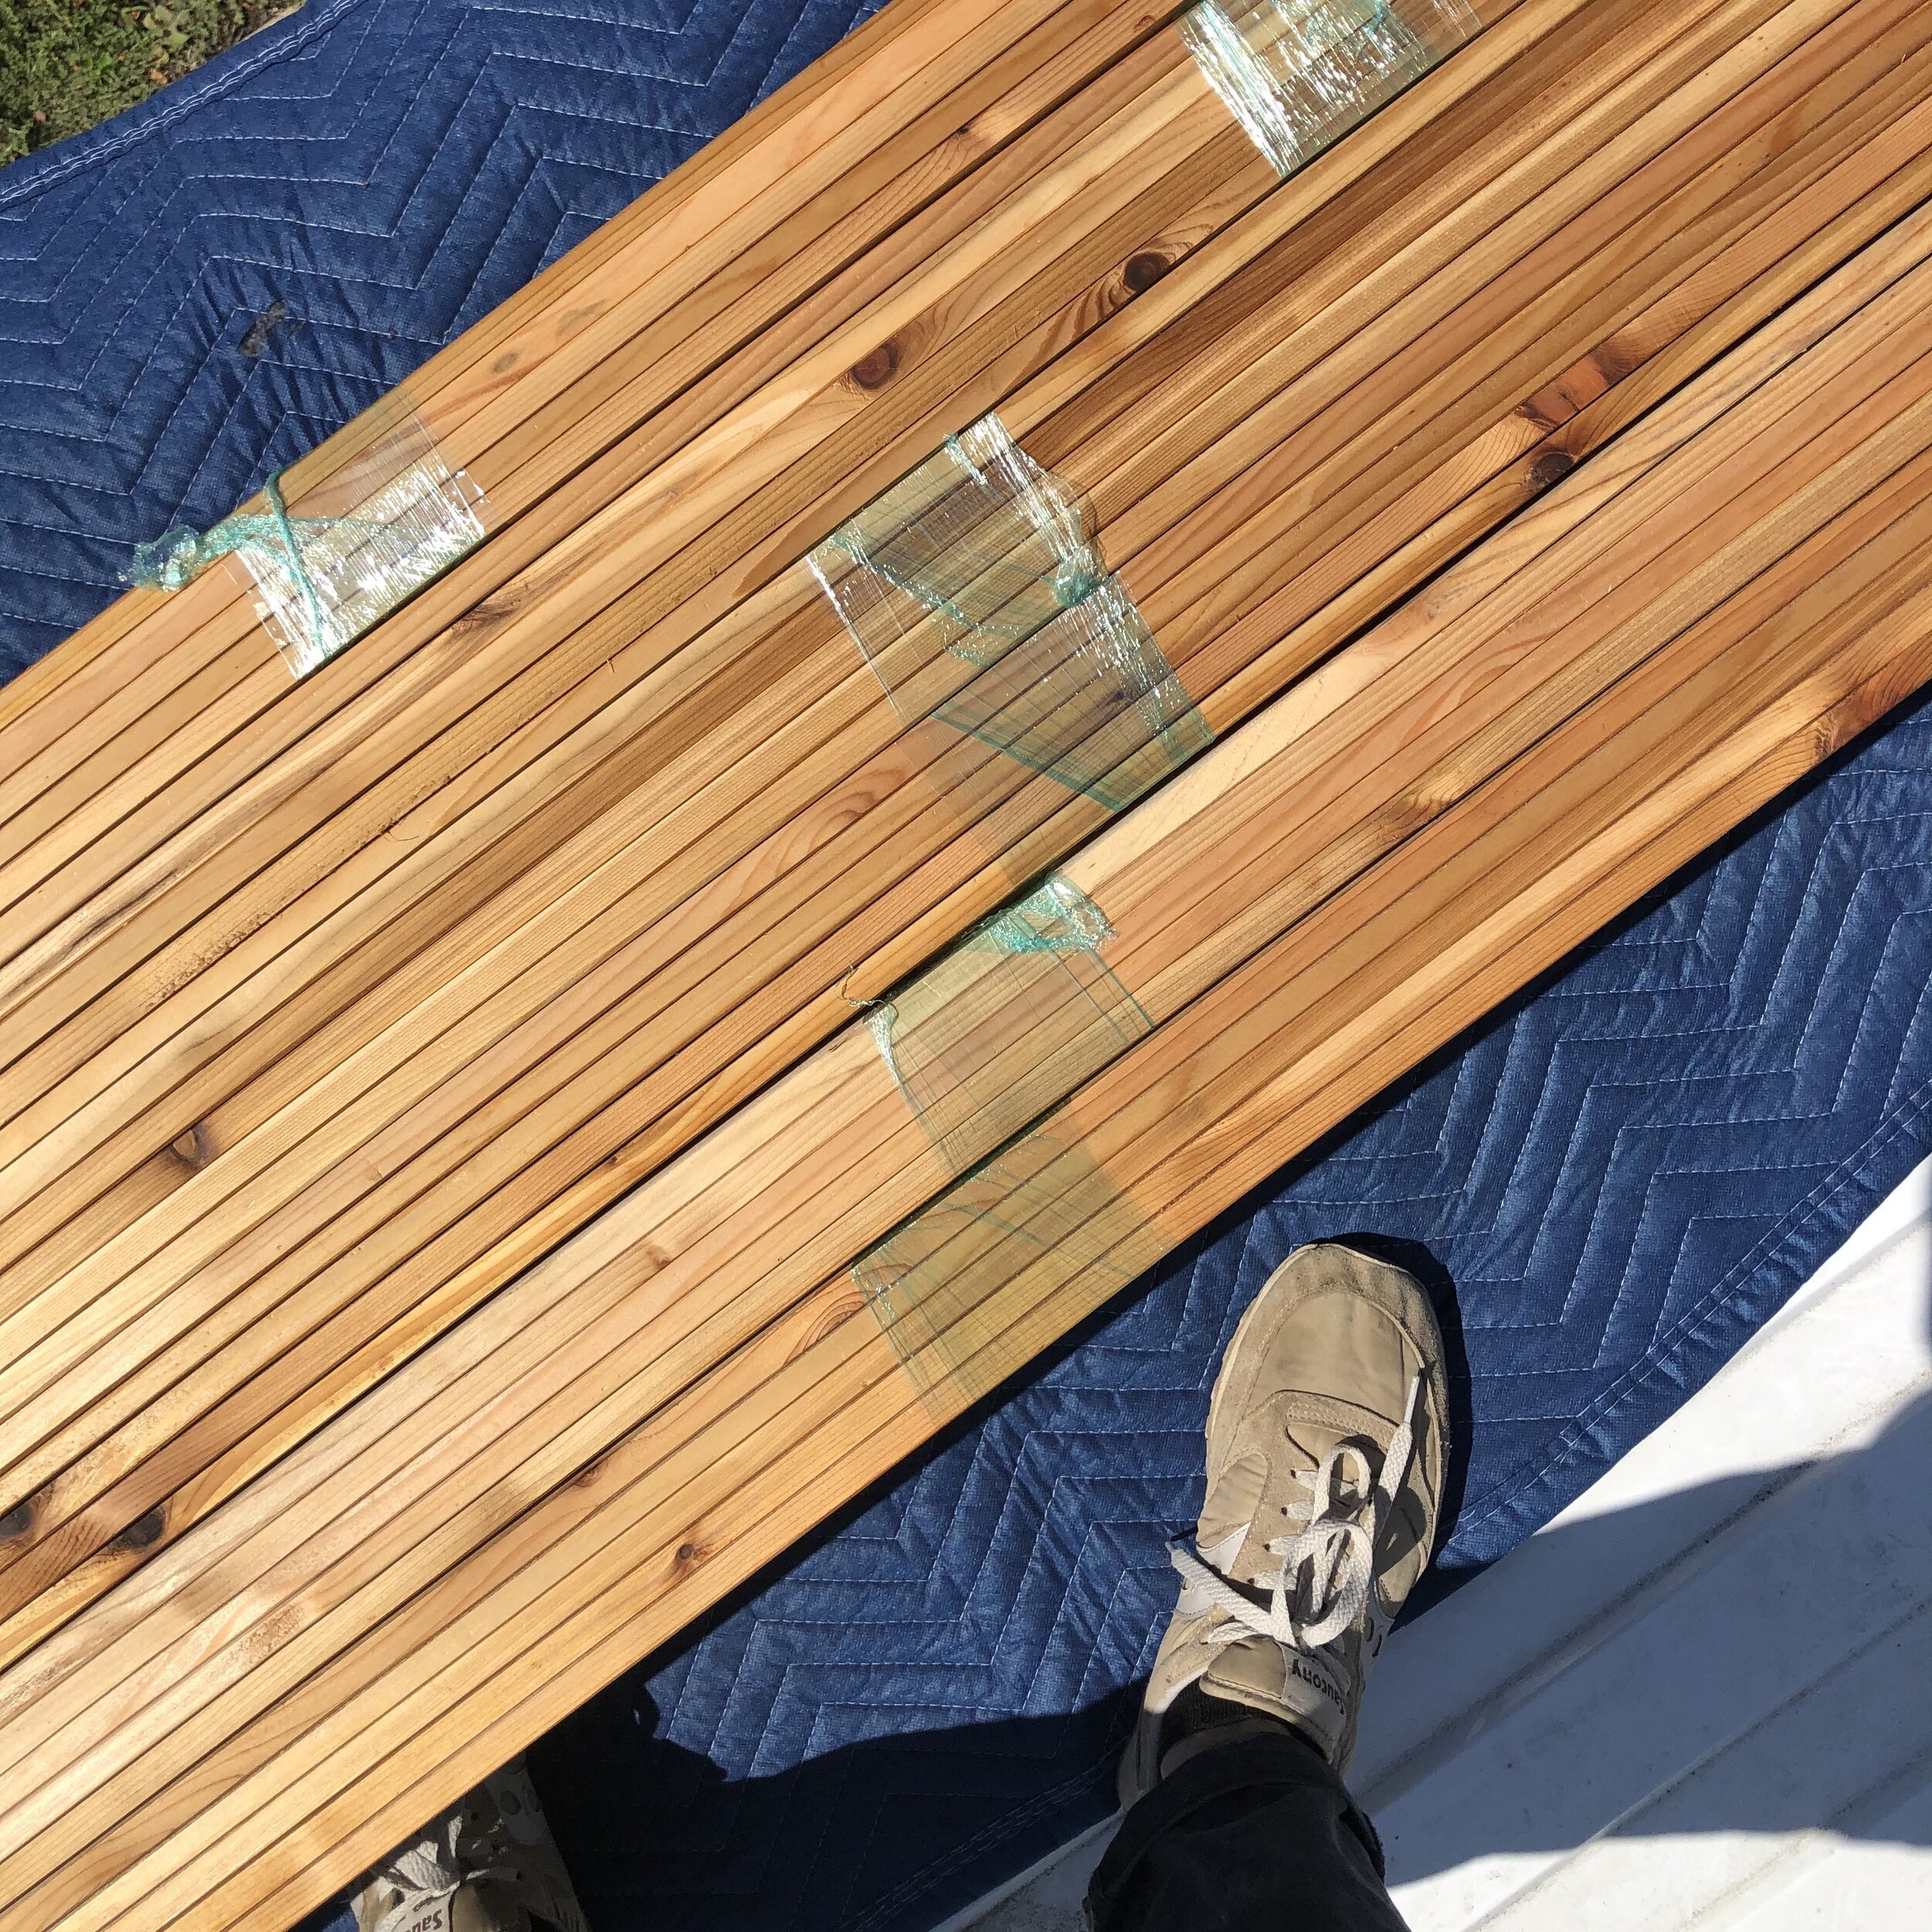  Cedar slats were oiled and then bundled to prevent warpage.&nbsp; 